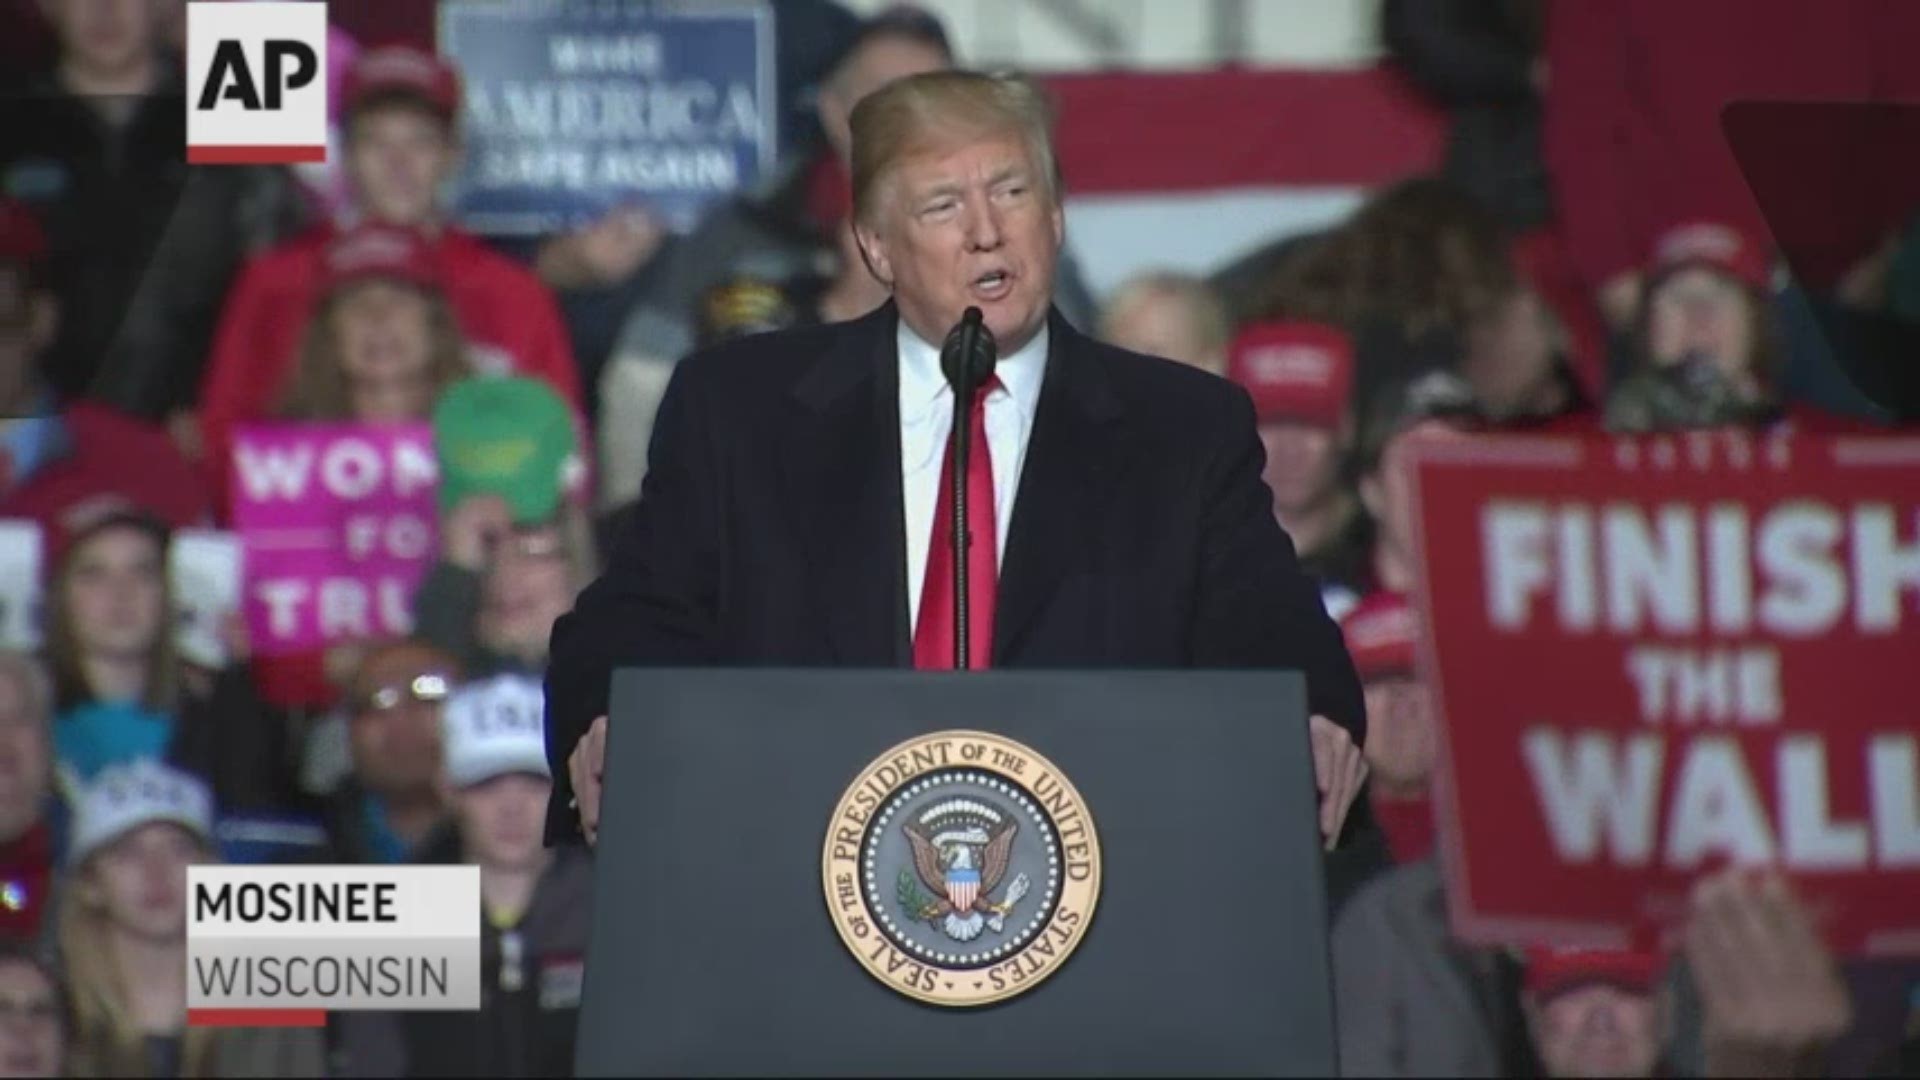 President Donald Trump says he's trying to be nice as he criticizes Sen. Tammy Baldwin and the Democrats at a Wisconsin rally following a series of attempted bombings on high-profile Democratic officials and CNN (AP)